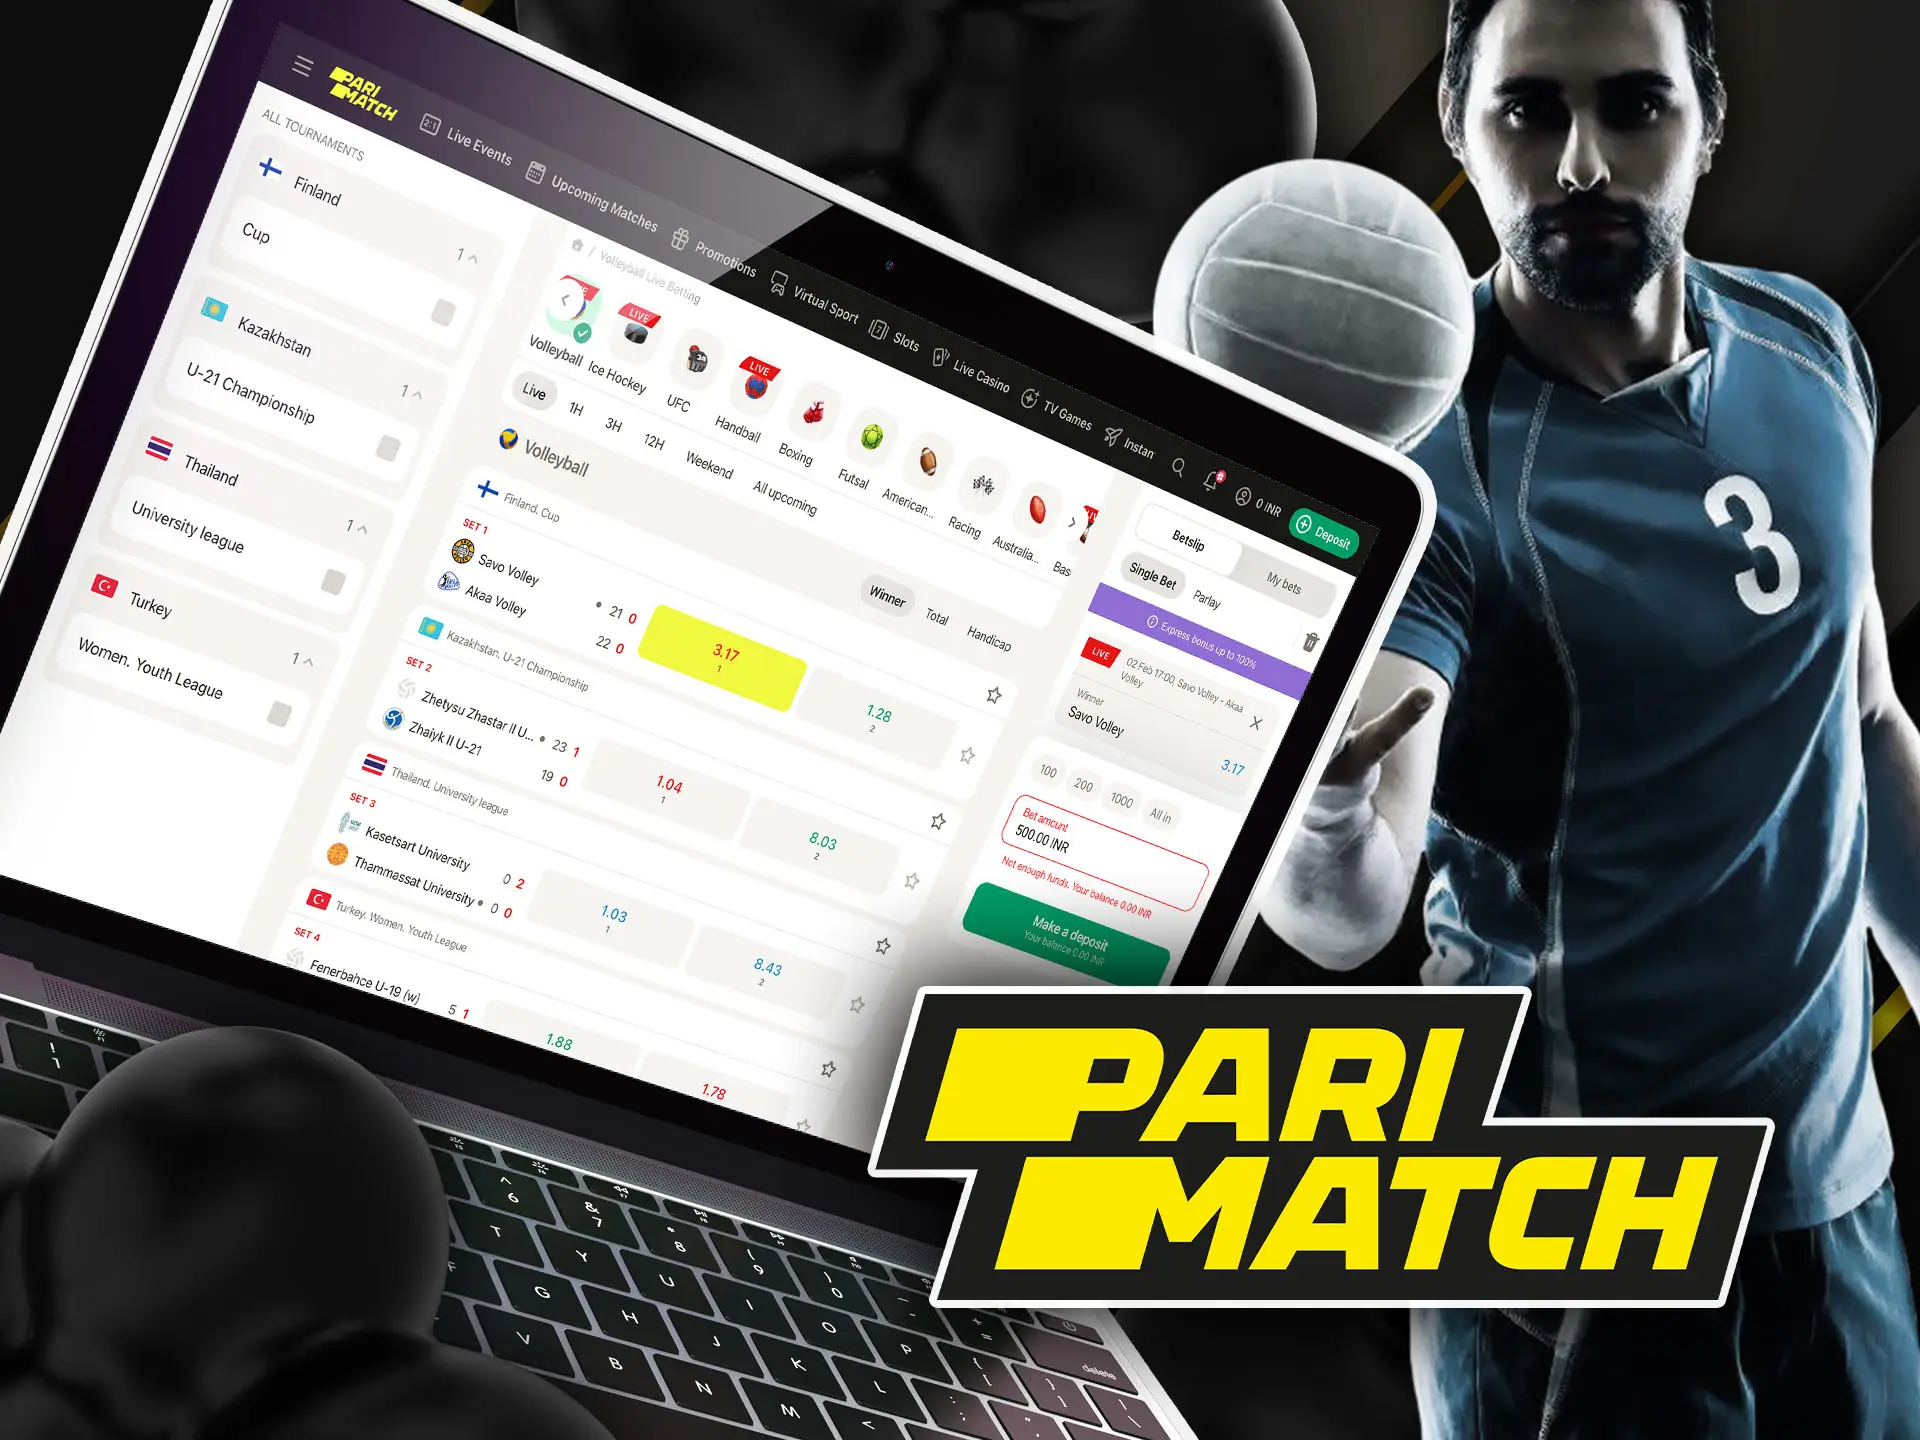 Volleyball betting at Parimatch for India.